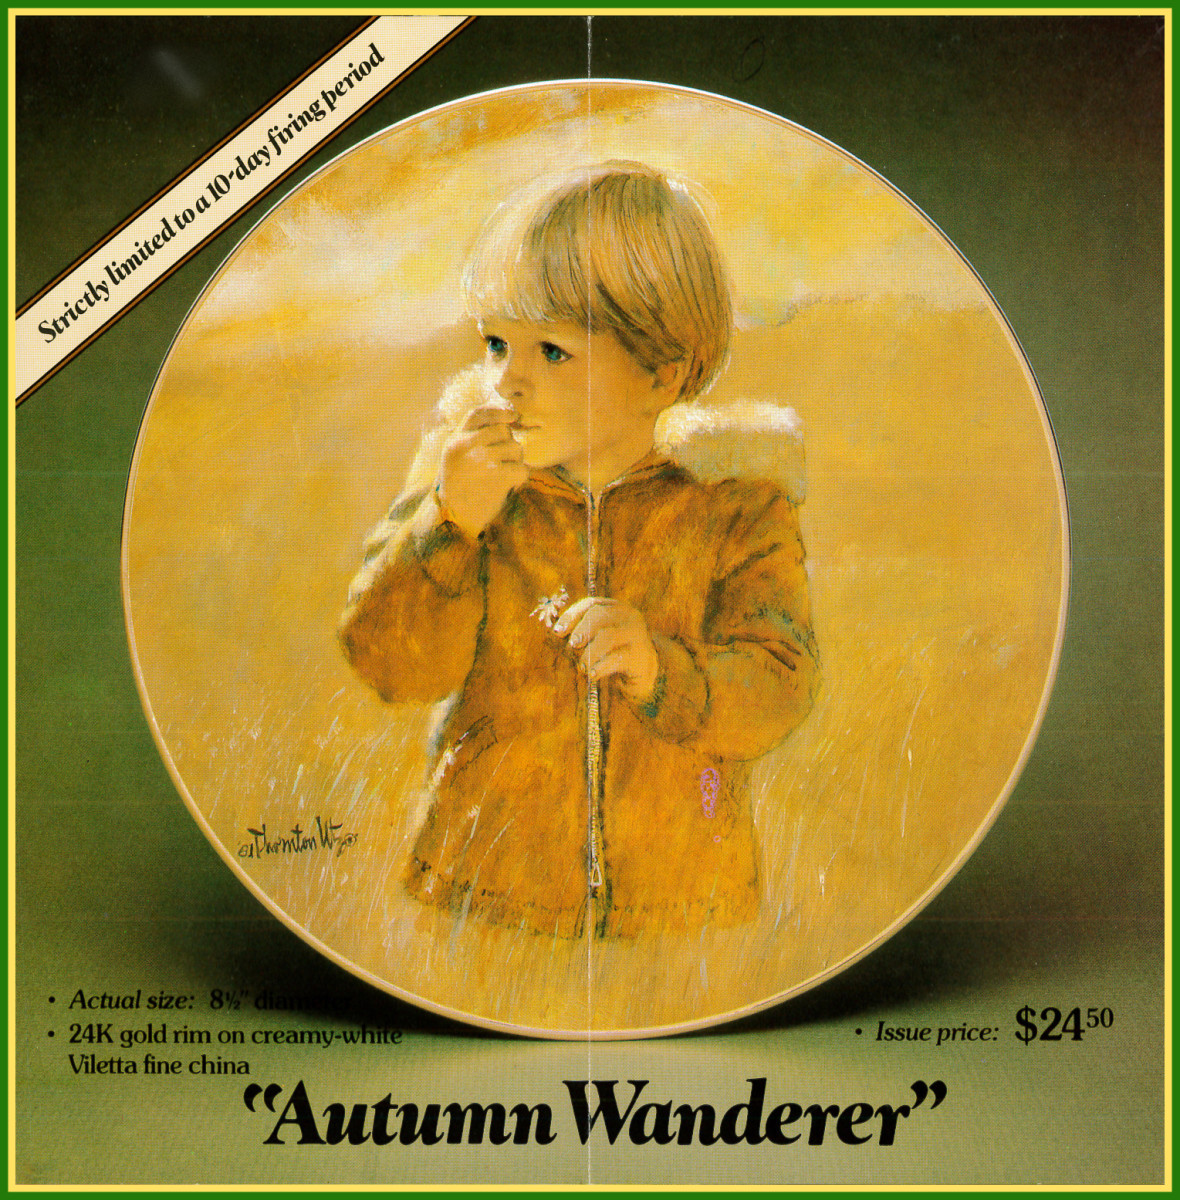 "Autumn Wanderer" actual size is eight and a have inches in diameter. The plate has a gold rim of 24K gold on a creamy white fine china, and is strictly limited to a ten day firing period. 